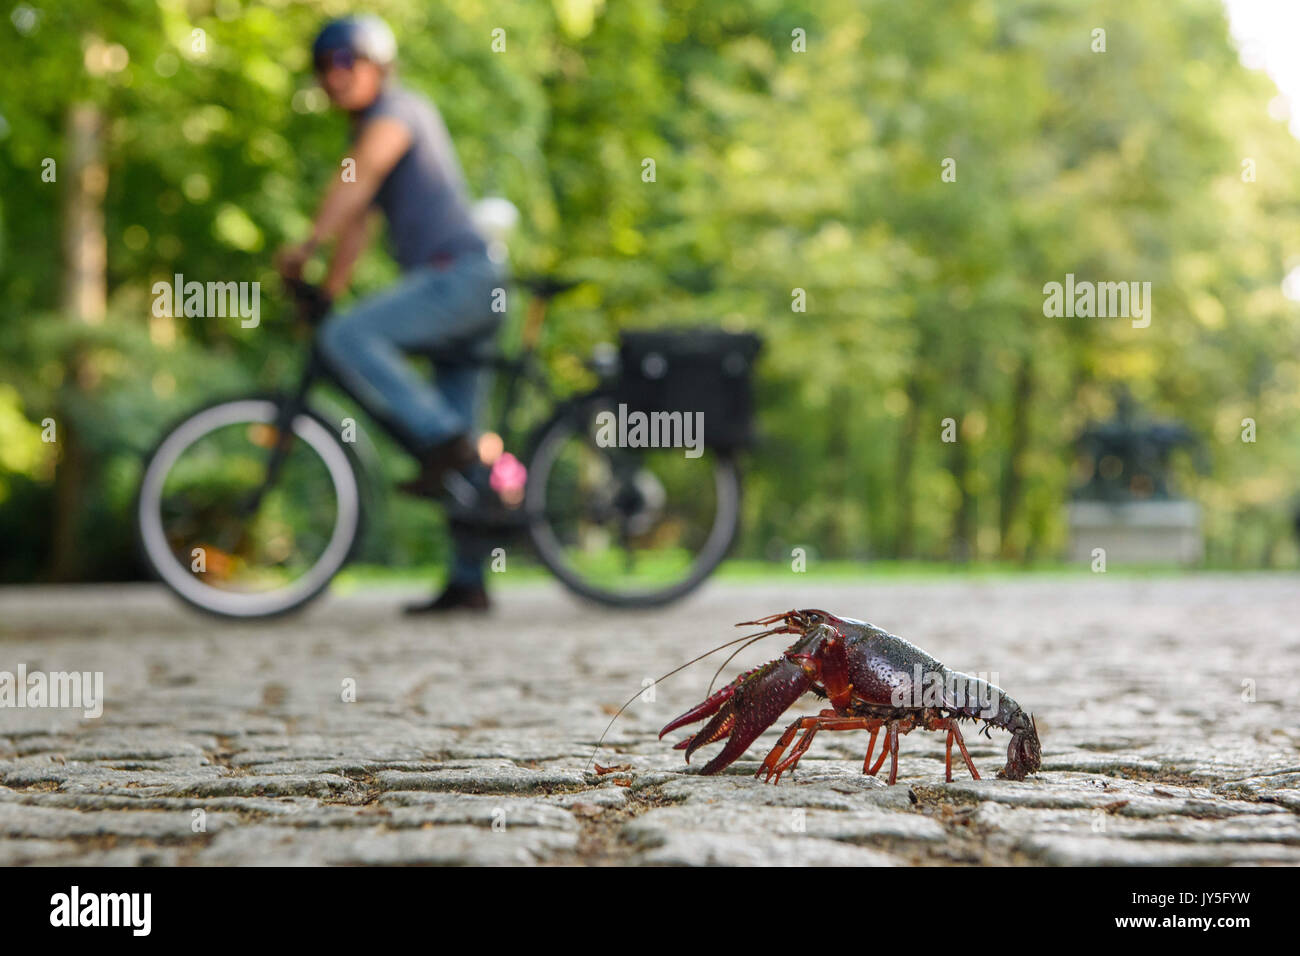 dpatop - A cyclist looking at a Louisiana crawfish (Procambarus clarkii) walking along a road in the Tiergarten in Berlin, Germany, 18 August 2017. Photo: Gregor Fischer/dpa Stock Photo